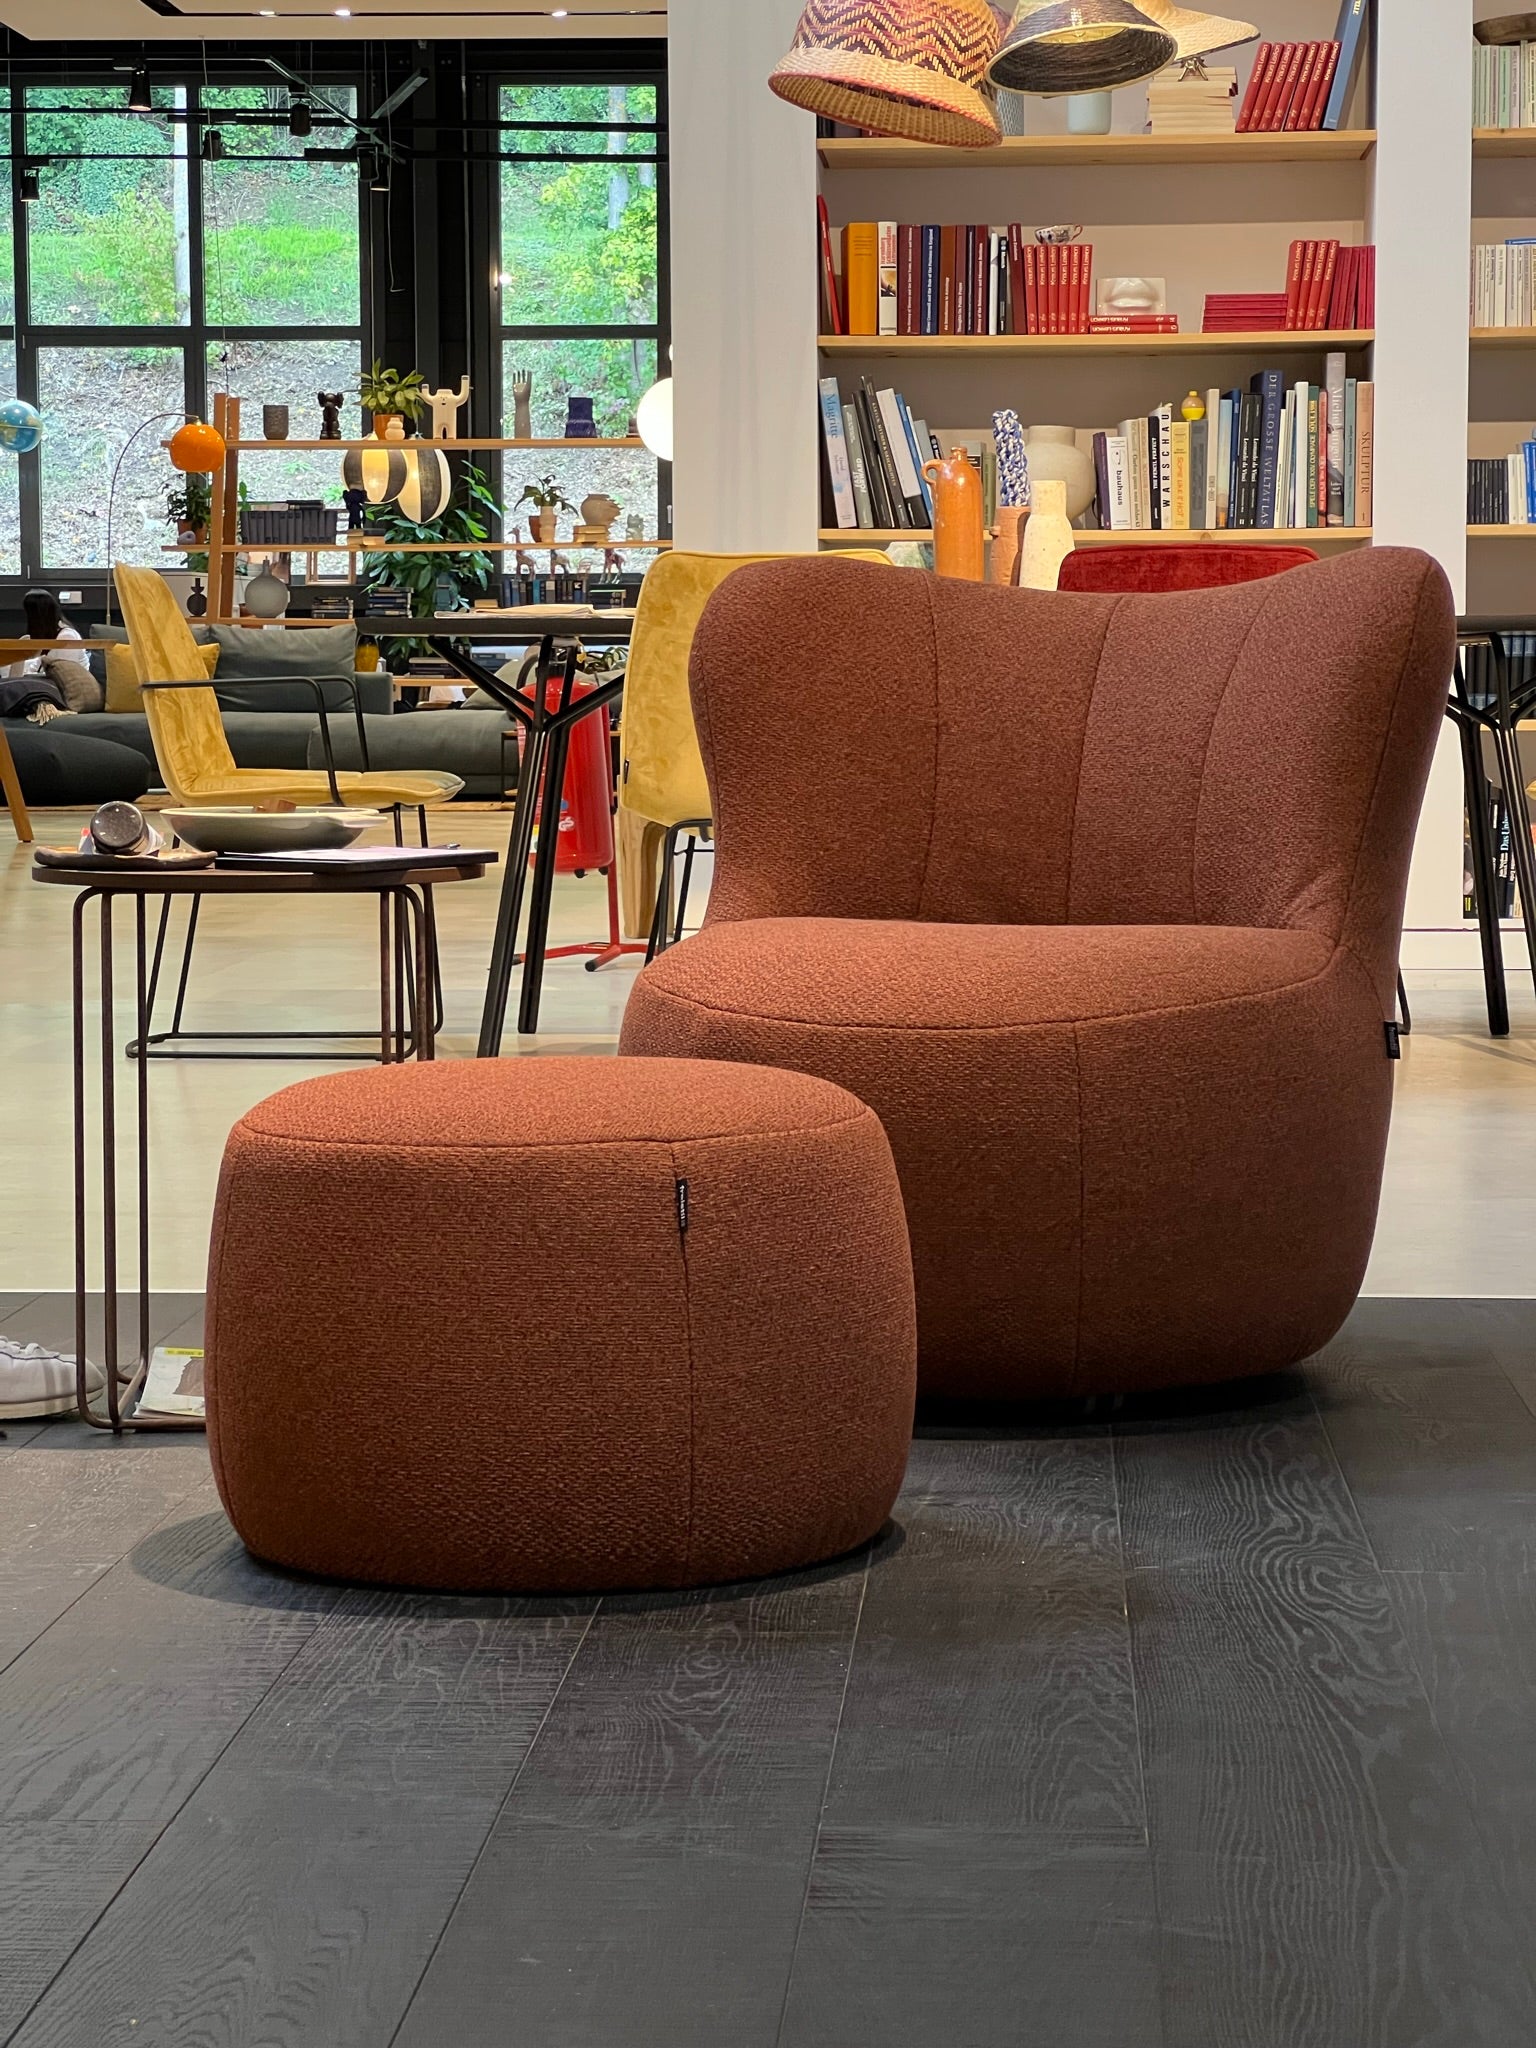 Freistil by Rolf Benz Lounge Chair and Ottoman – Modus10